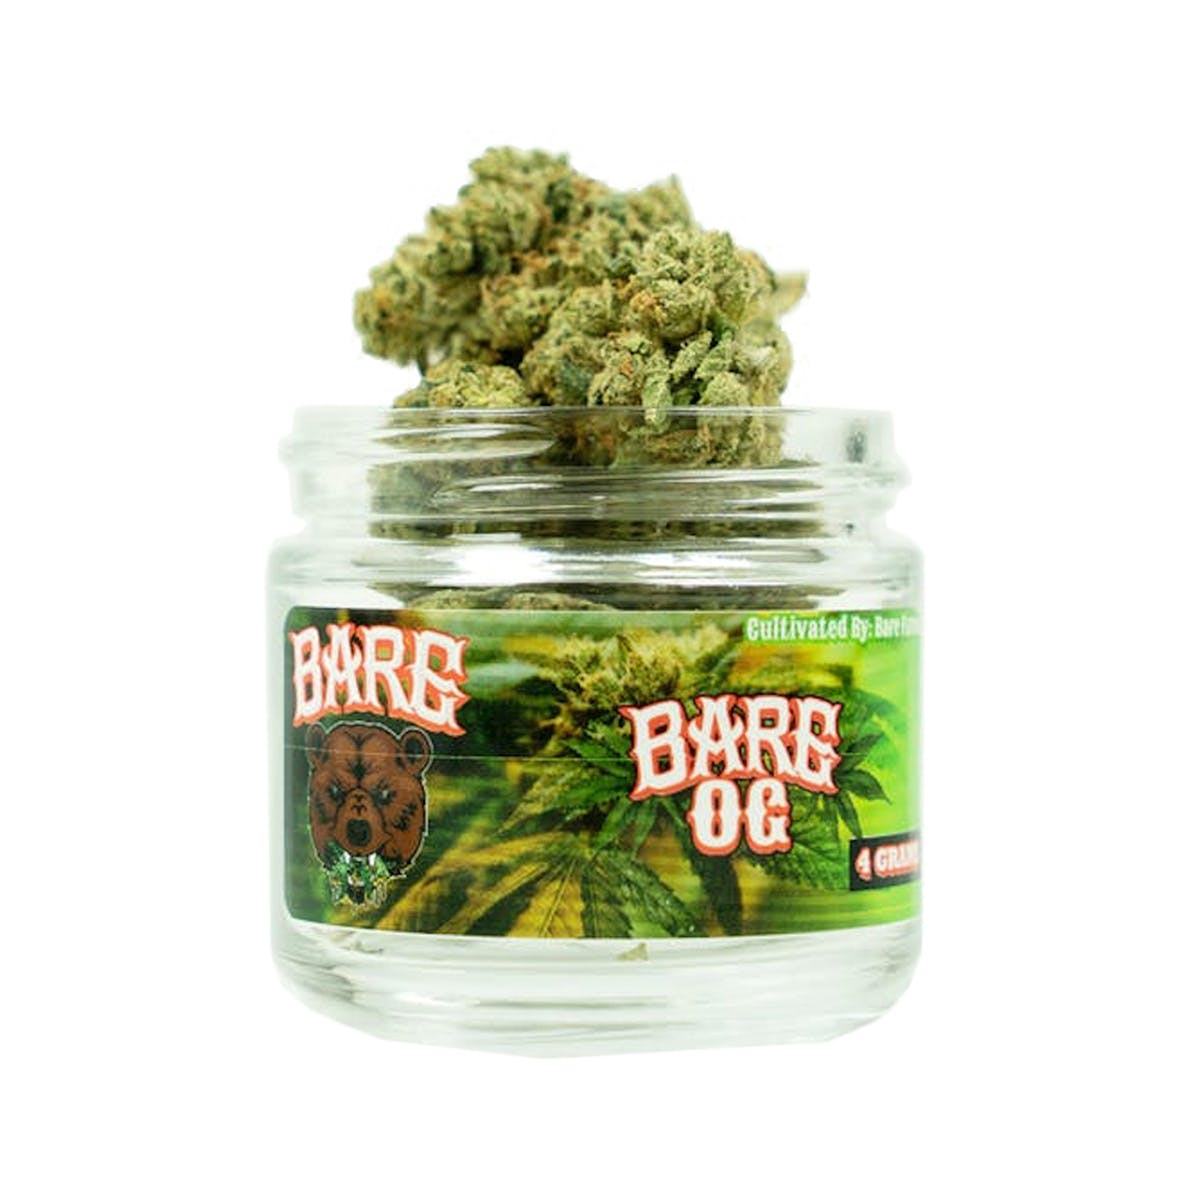 marijuana-dispensaries-north-county-meds-collective-in-san-marcos-bare-farms-bare-og